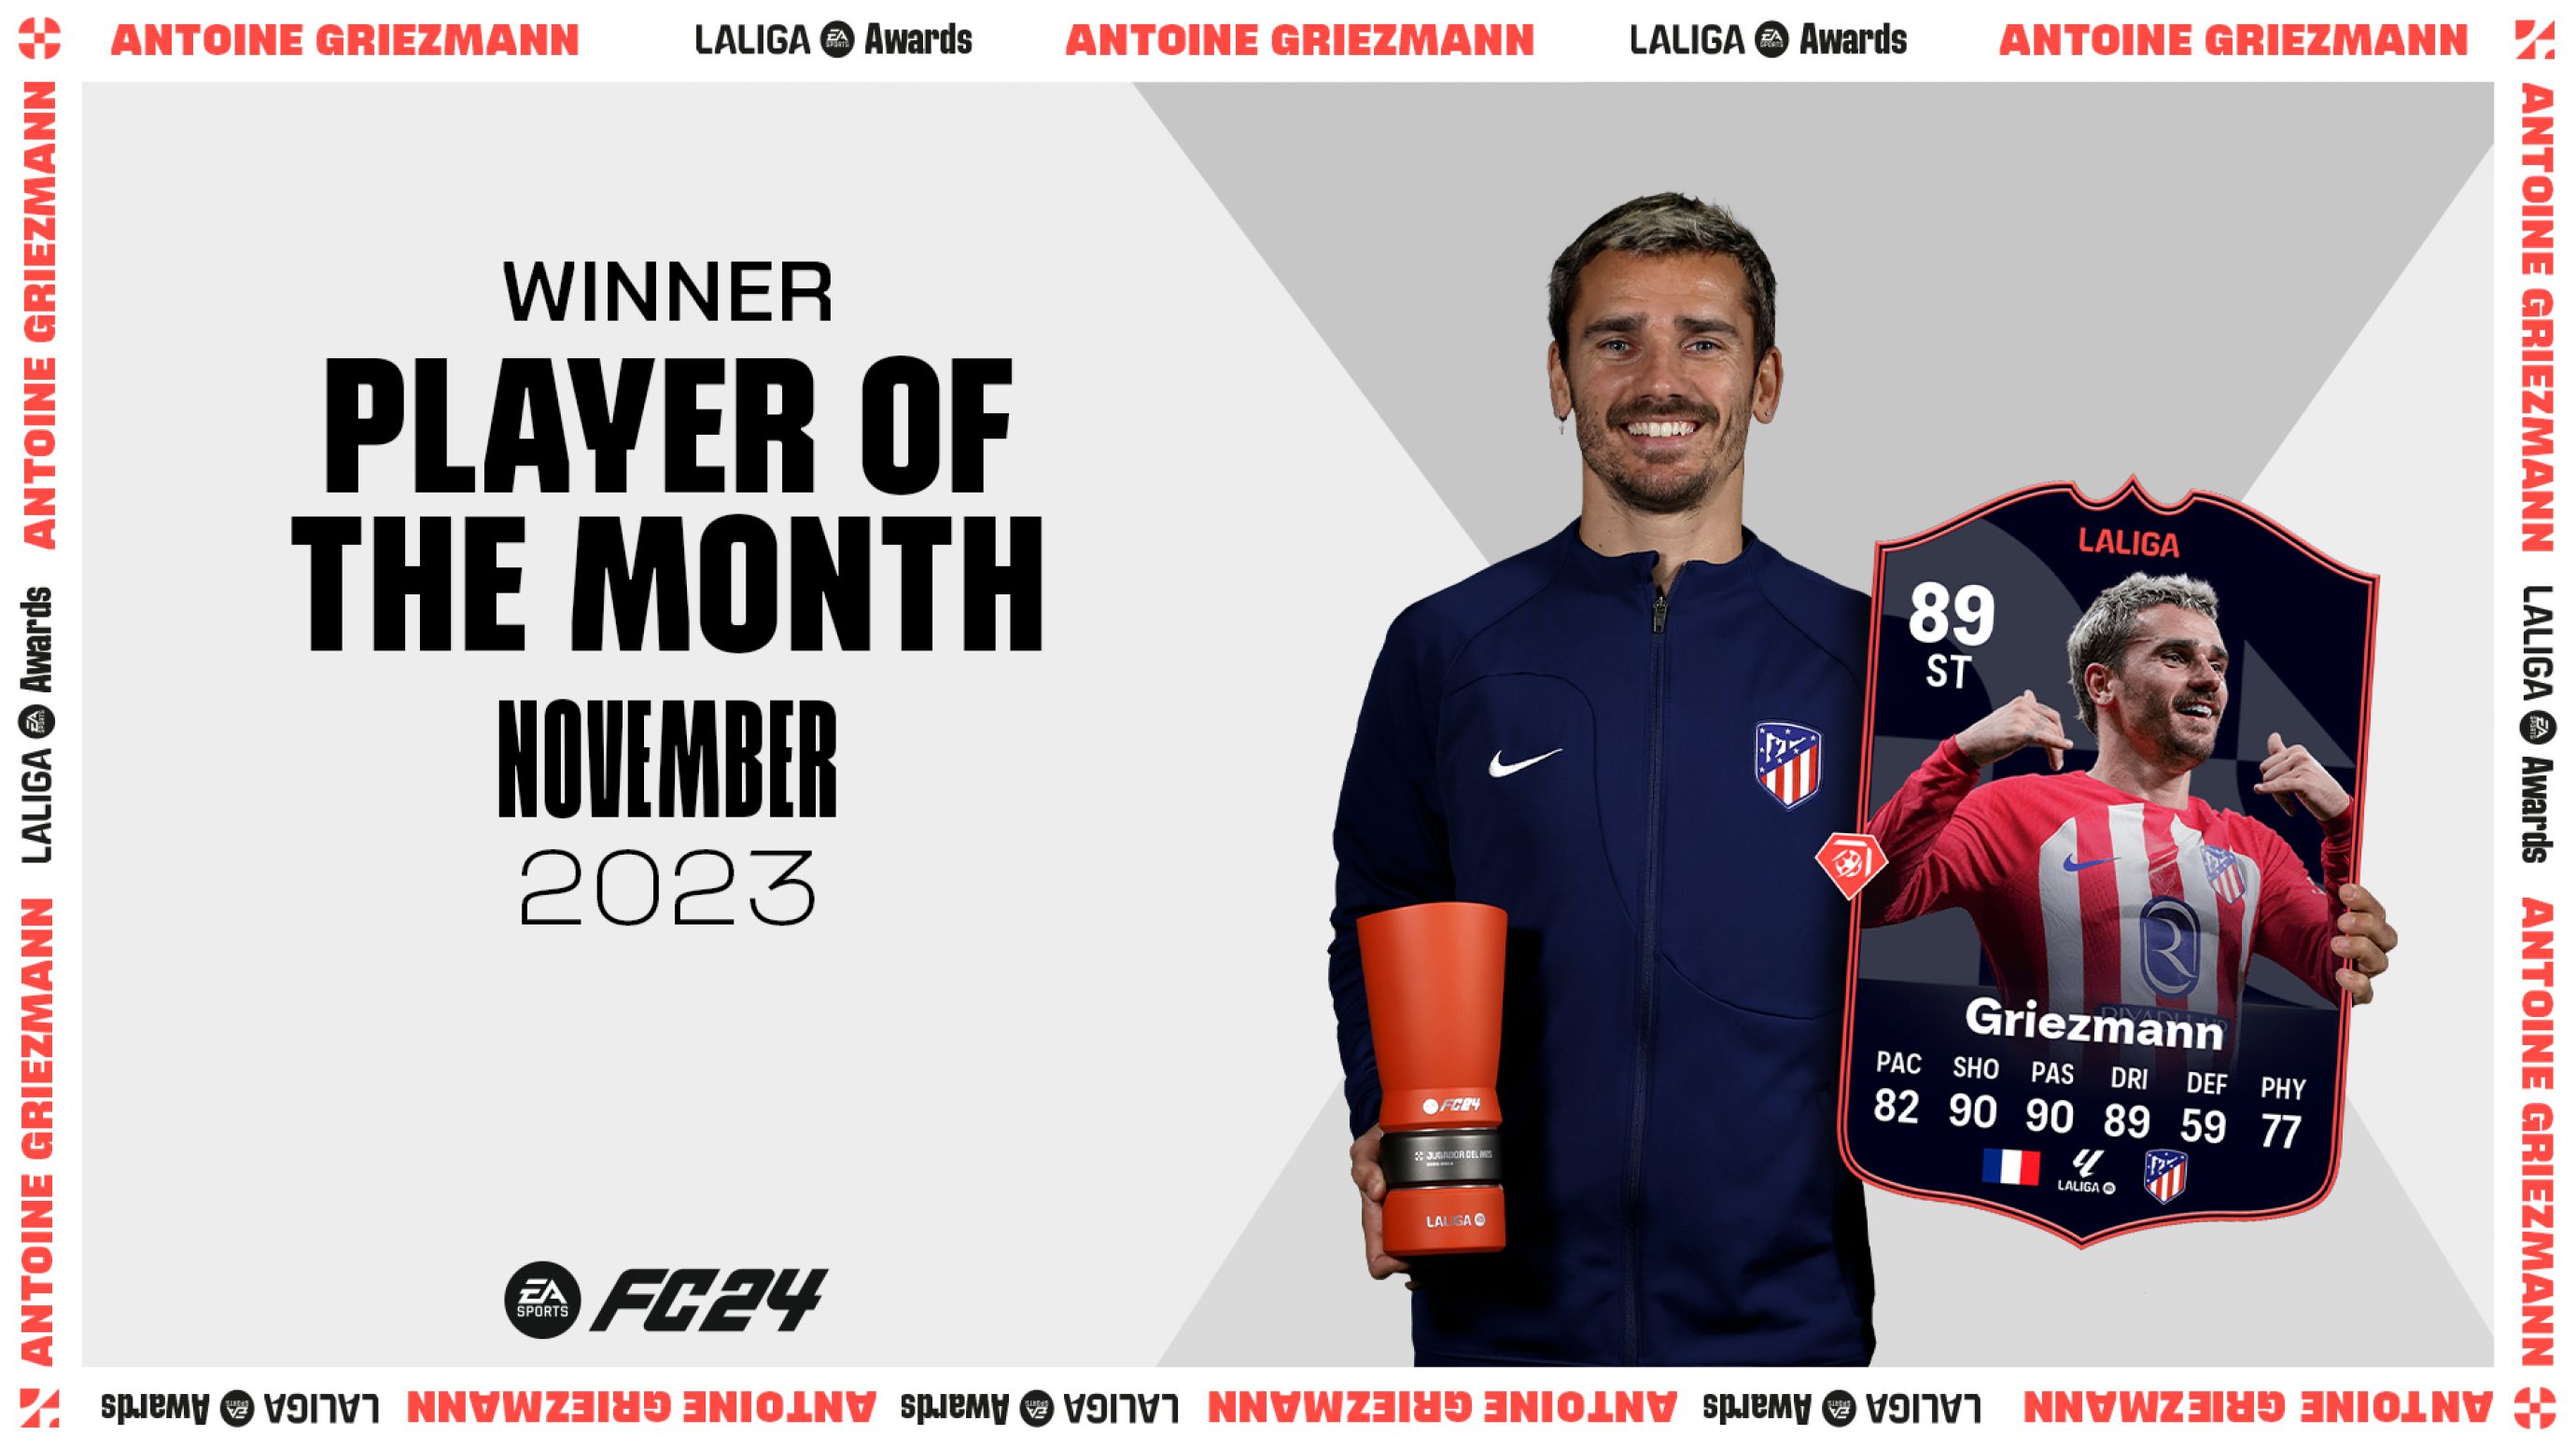 Jude Bellingham named LaLiga player of the month after four goals